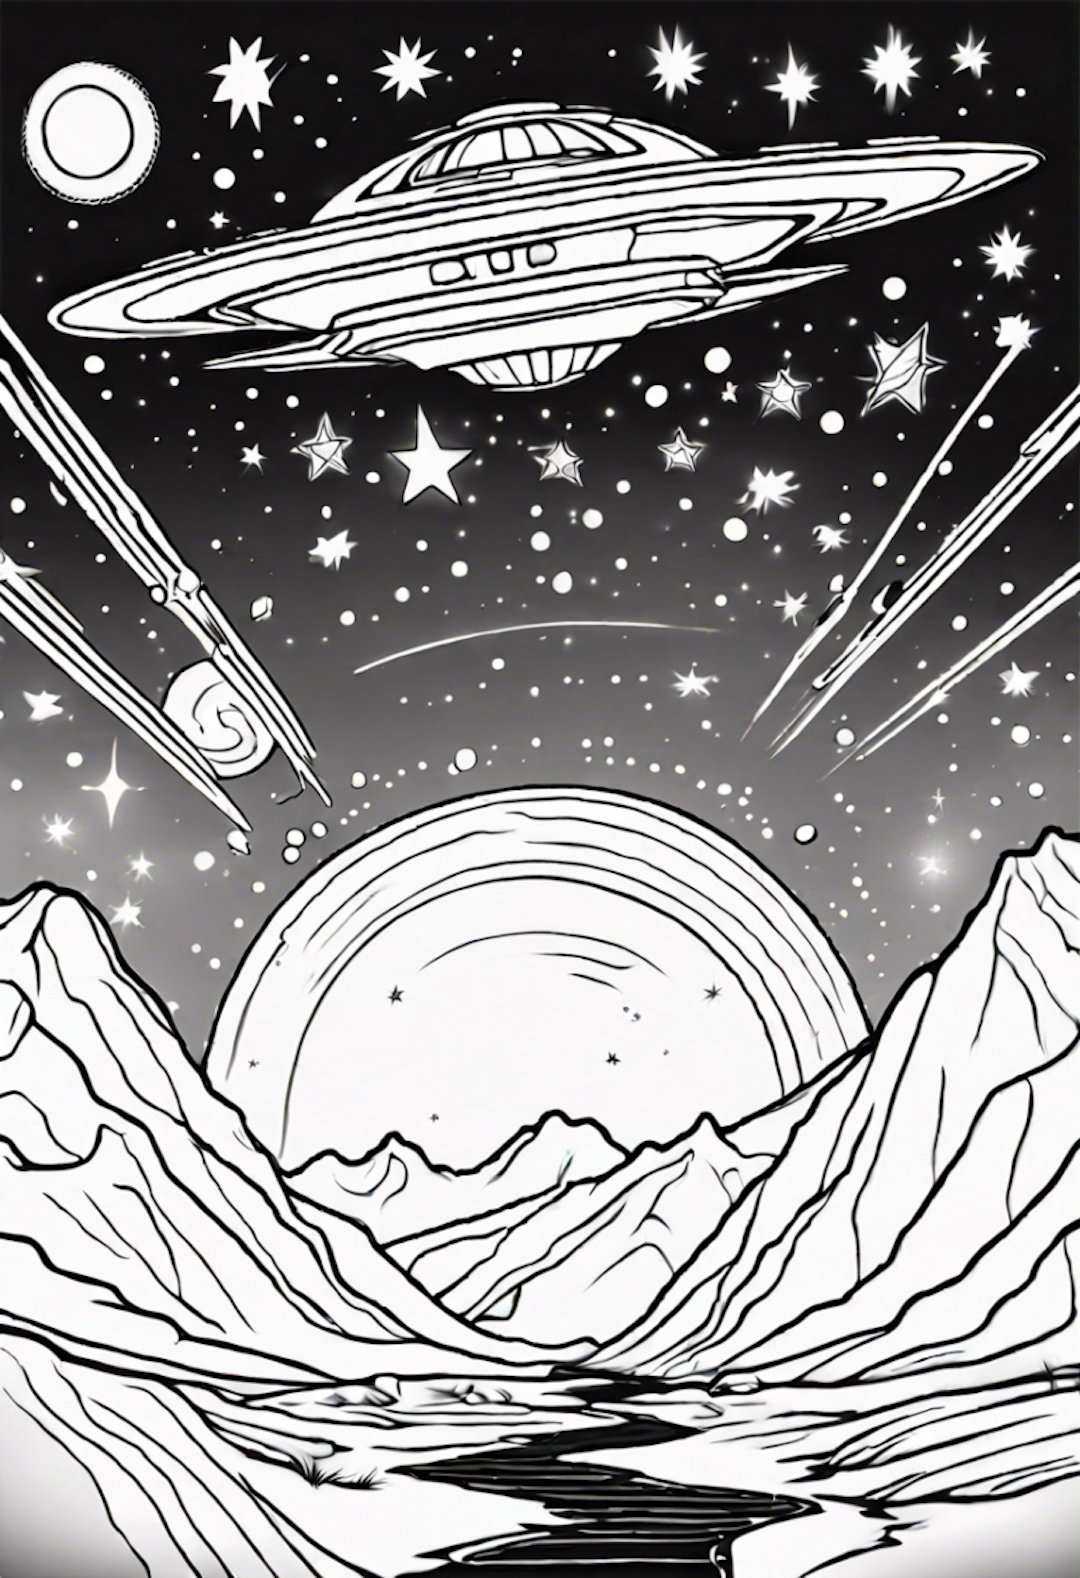 UFO Adventure in a Starry Mountain Landscape coloring pages